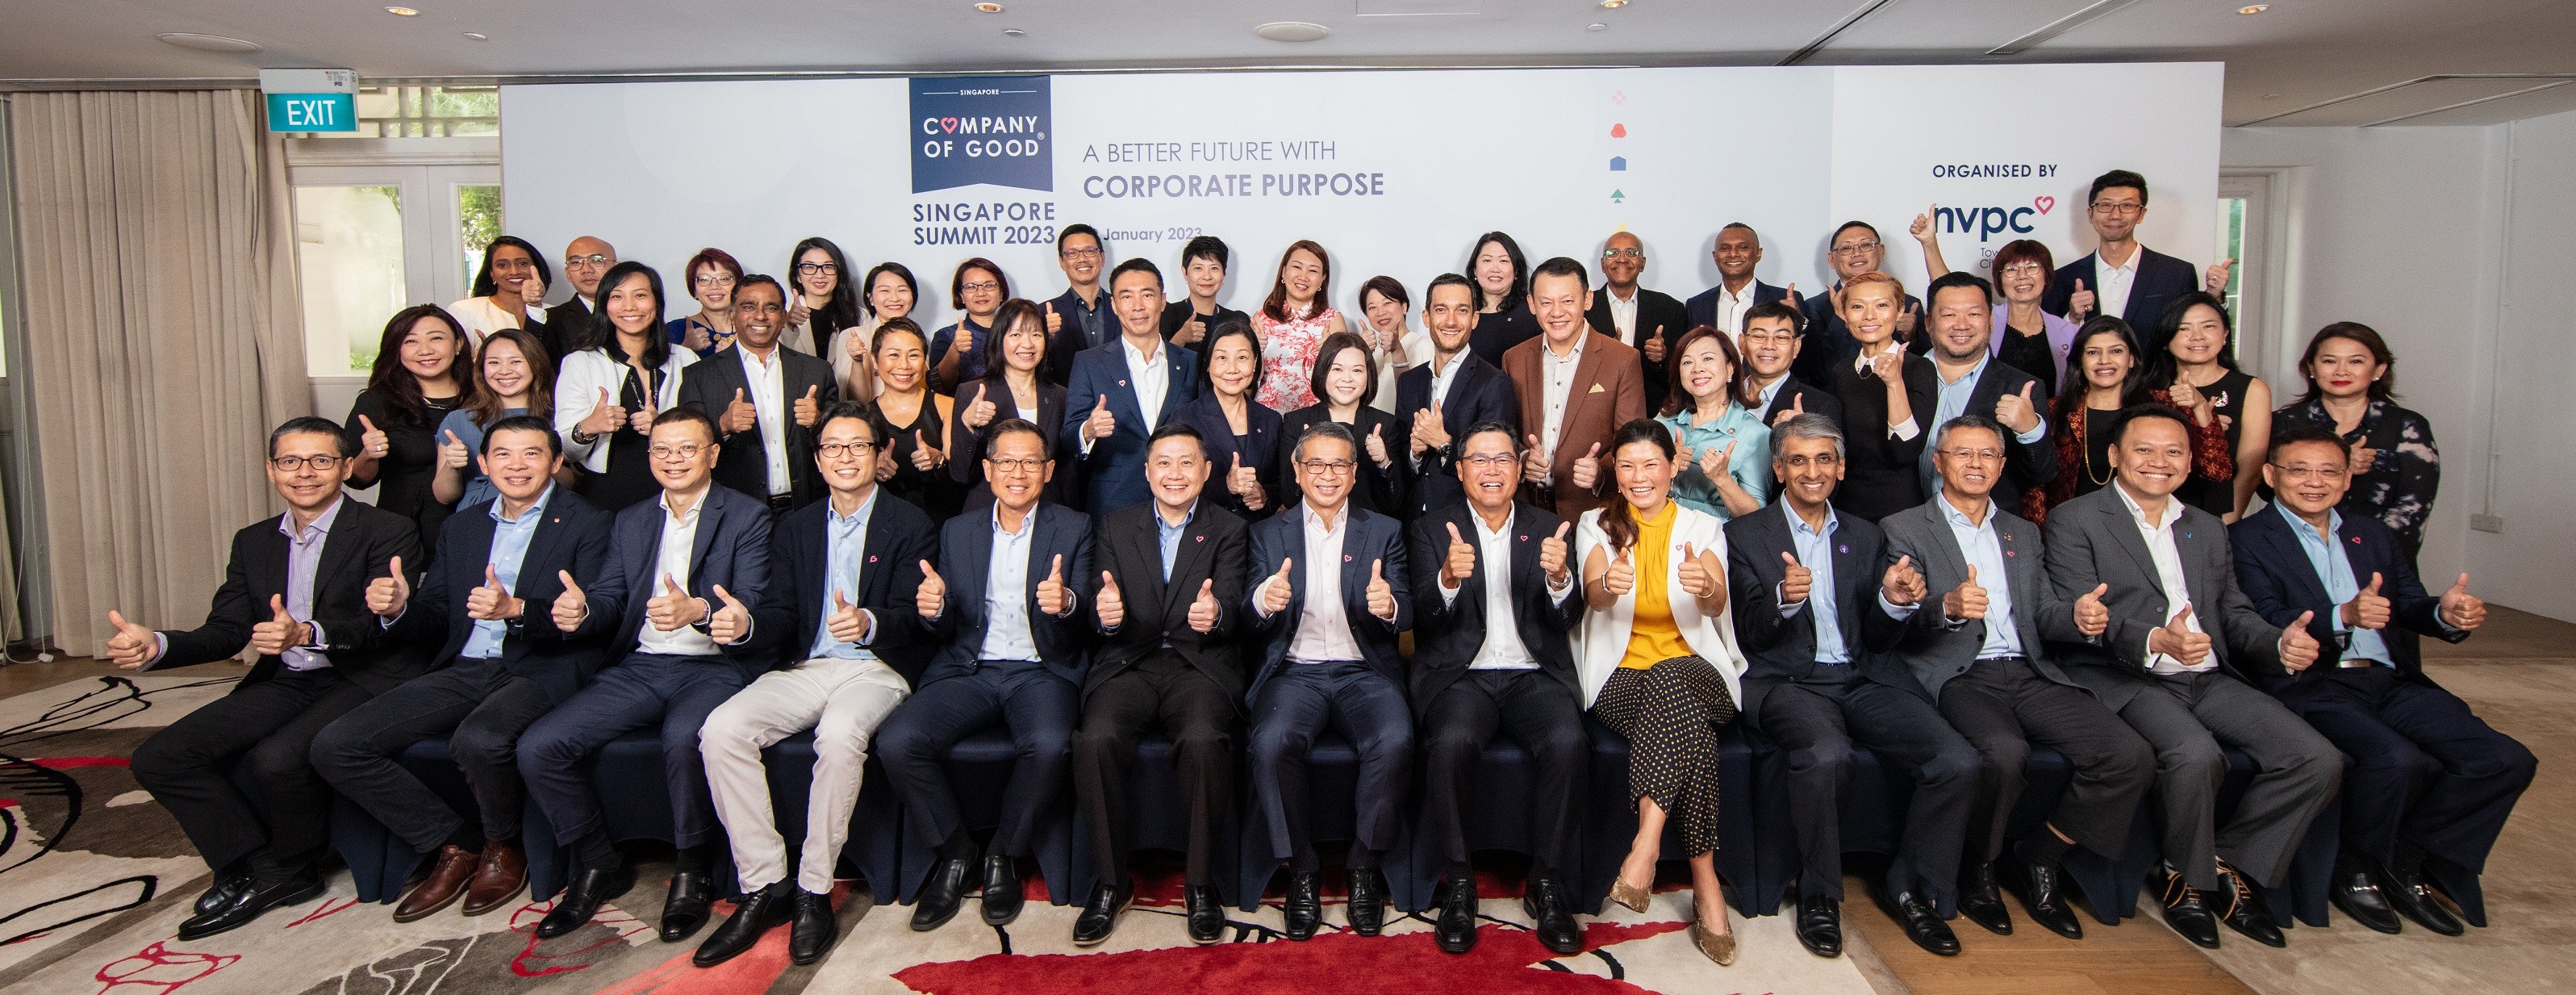 Soon Su Lin (eighth from the left in the second row), Frasers Property Singapore Chief Executive Officer, together with key leaders from Singapore’s private and public sectors at the Company for Good Singapore Summit 2023.